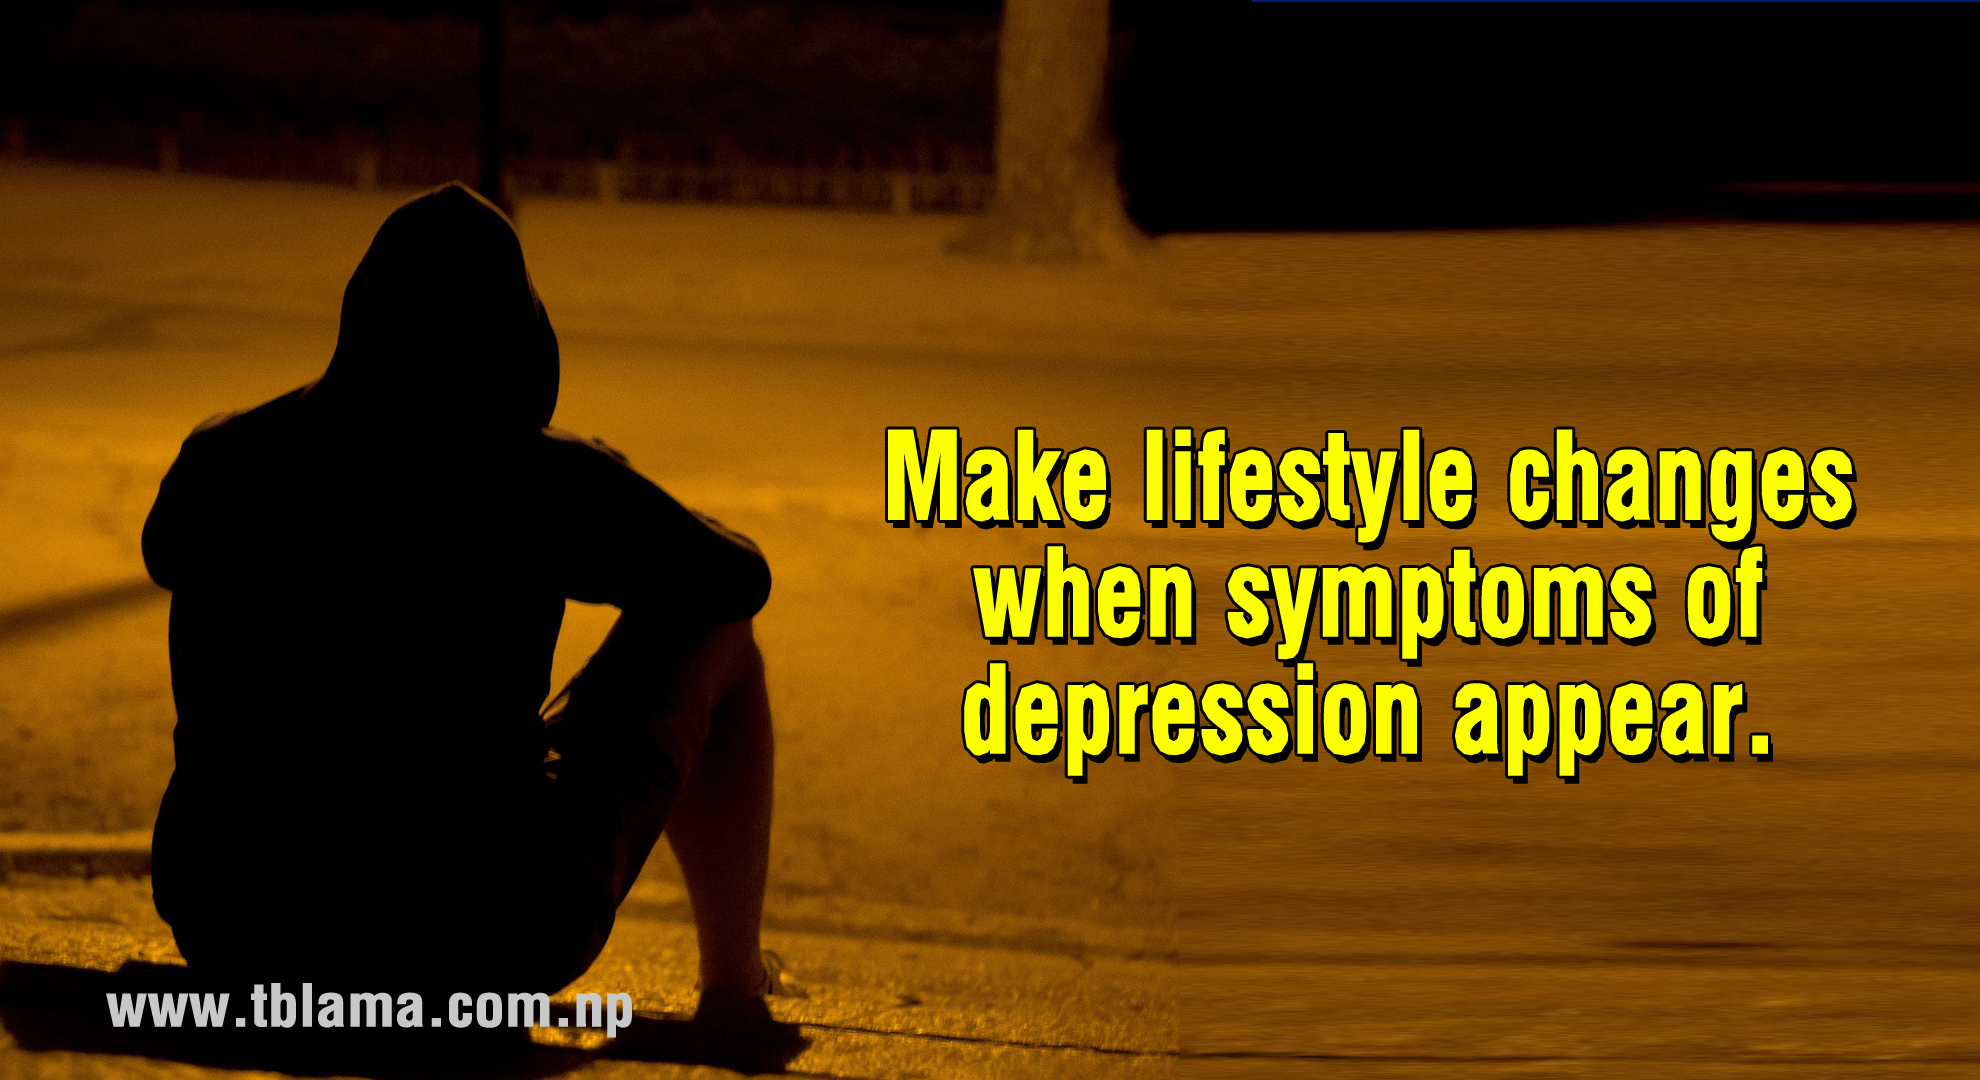 Make lifestyle changes when symptoms of depression appear.